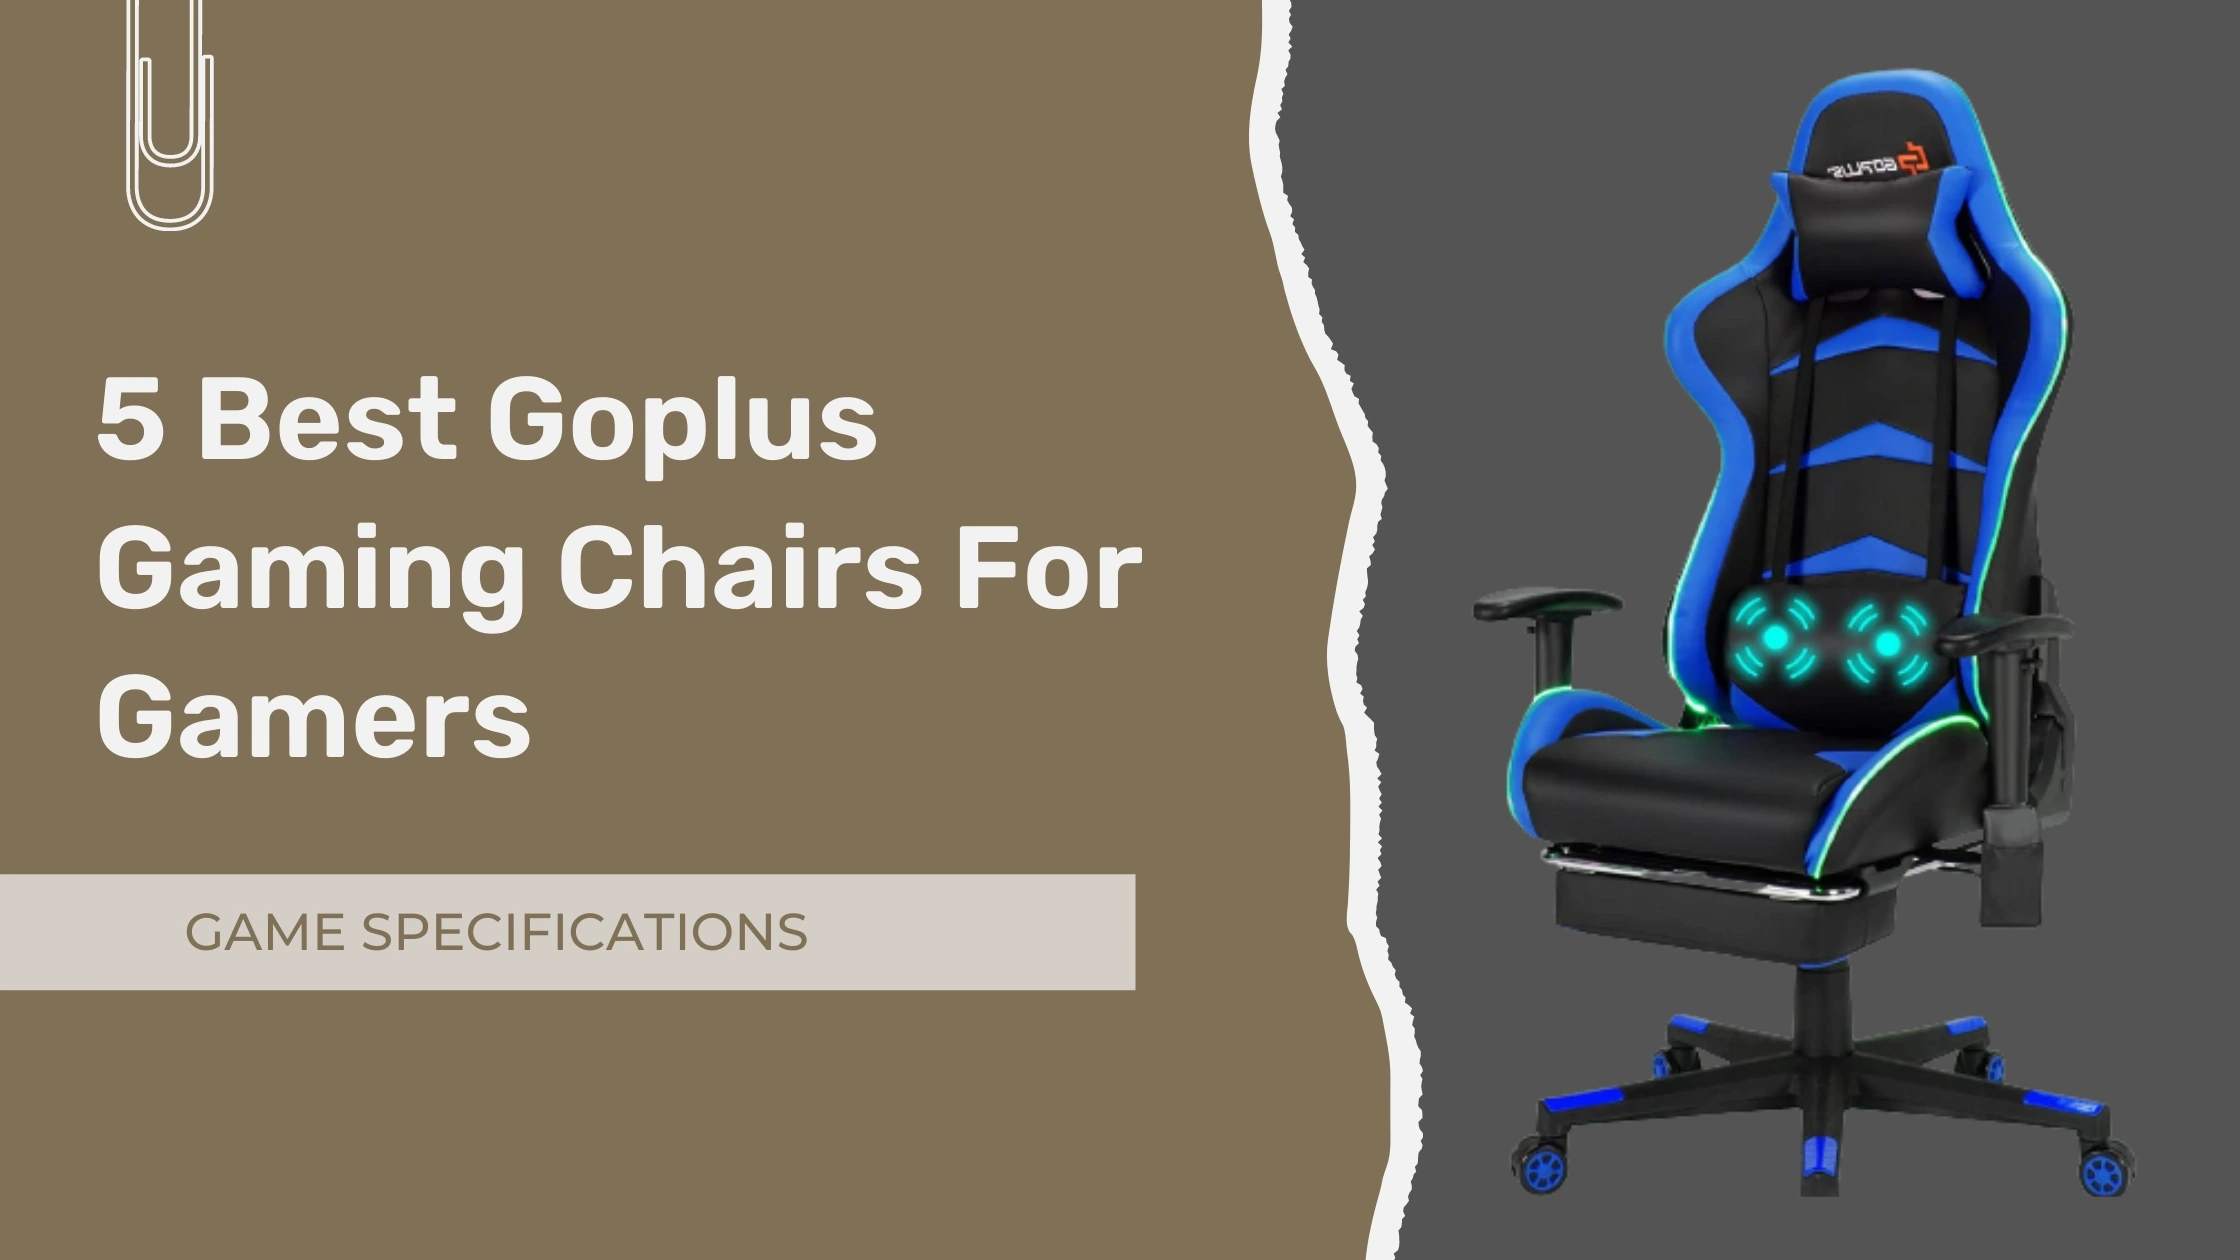 5 Best Goplus Gaming Chairs For Gamers